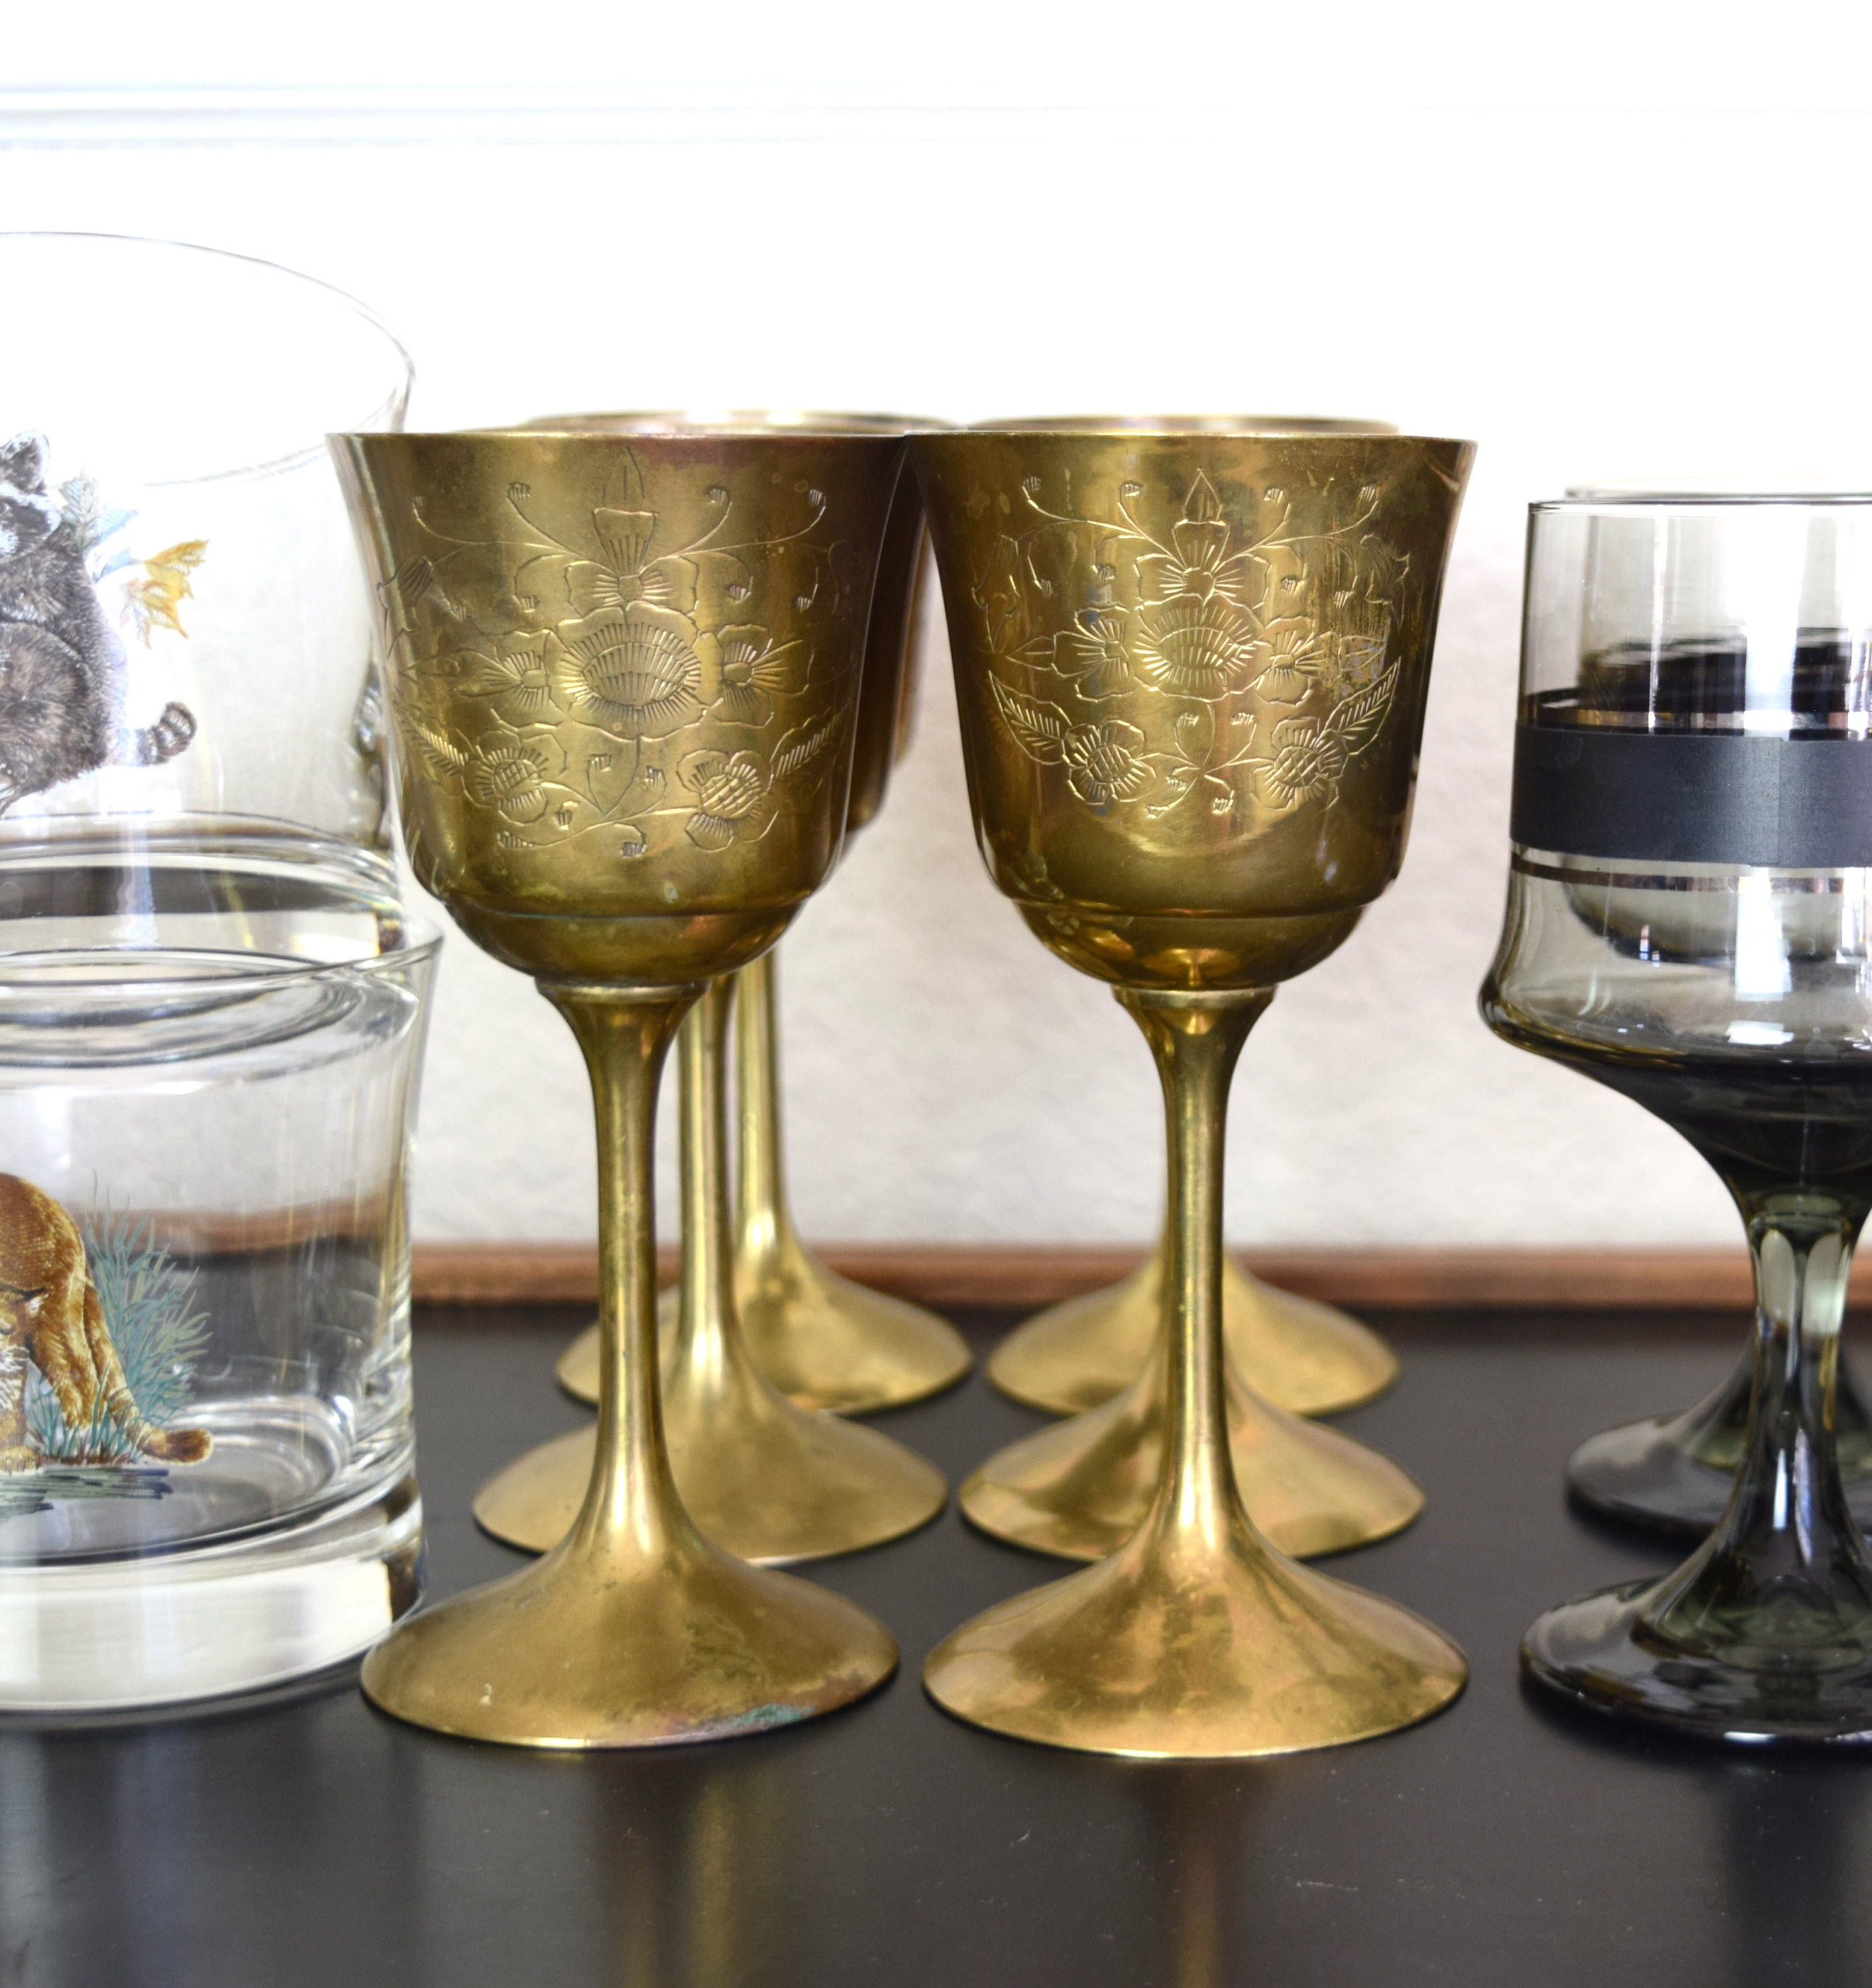 Vintage Brass Wine Glasses6 Small Wine Glasses Etched With